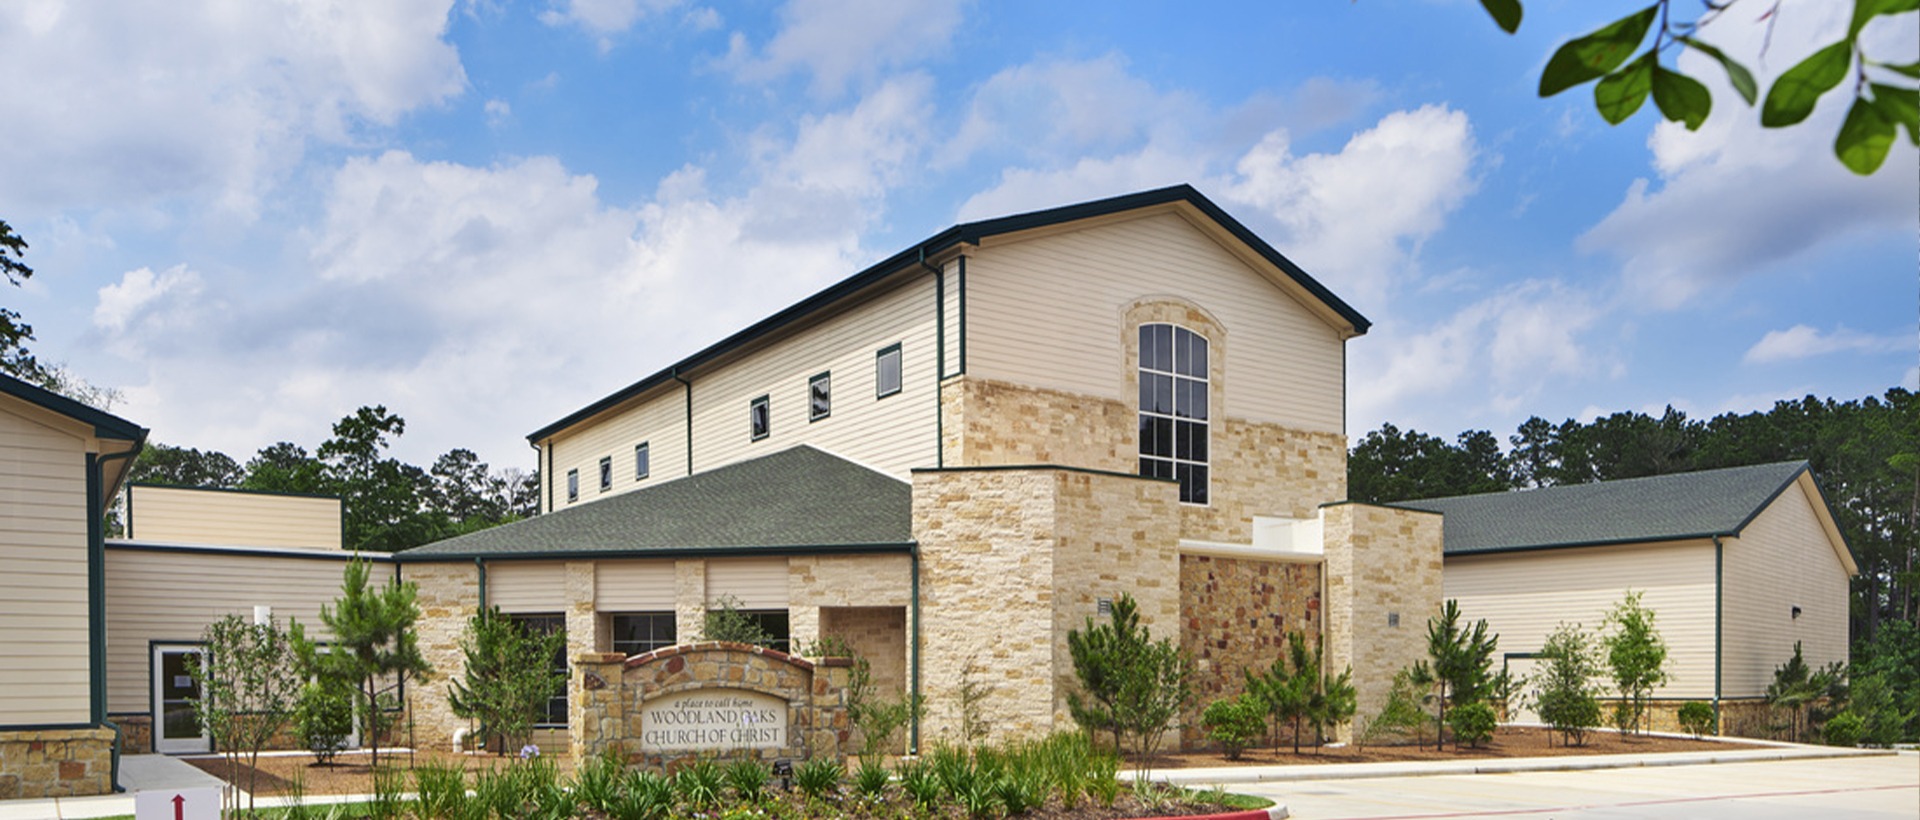 The Woodlands Church of Christ